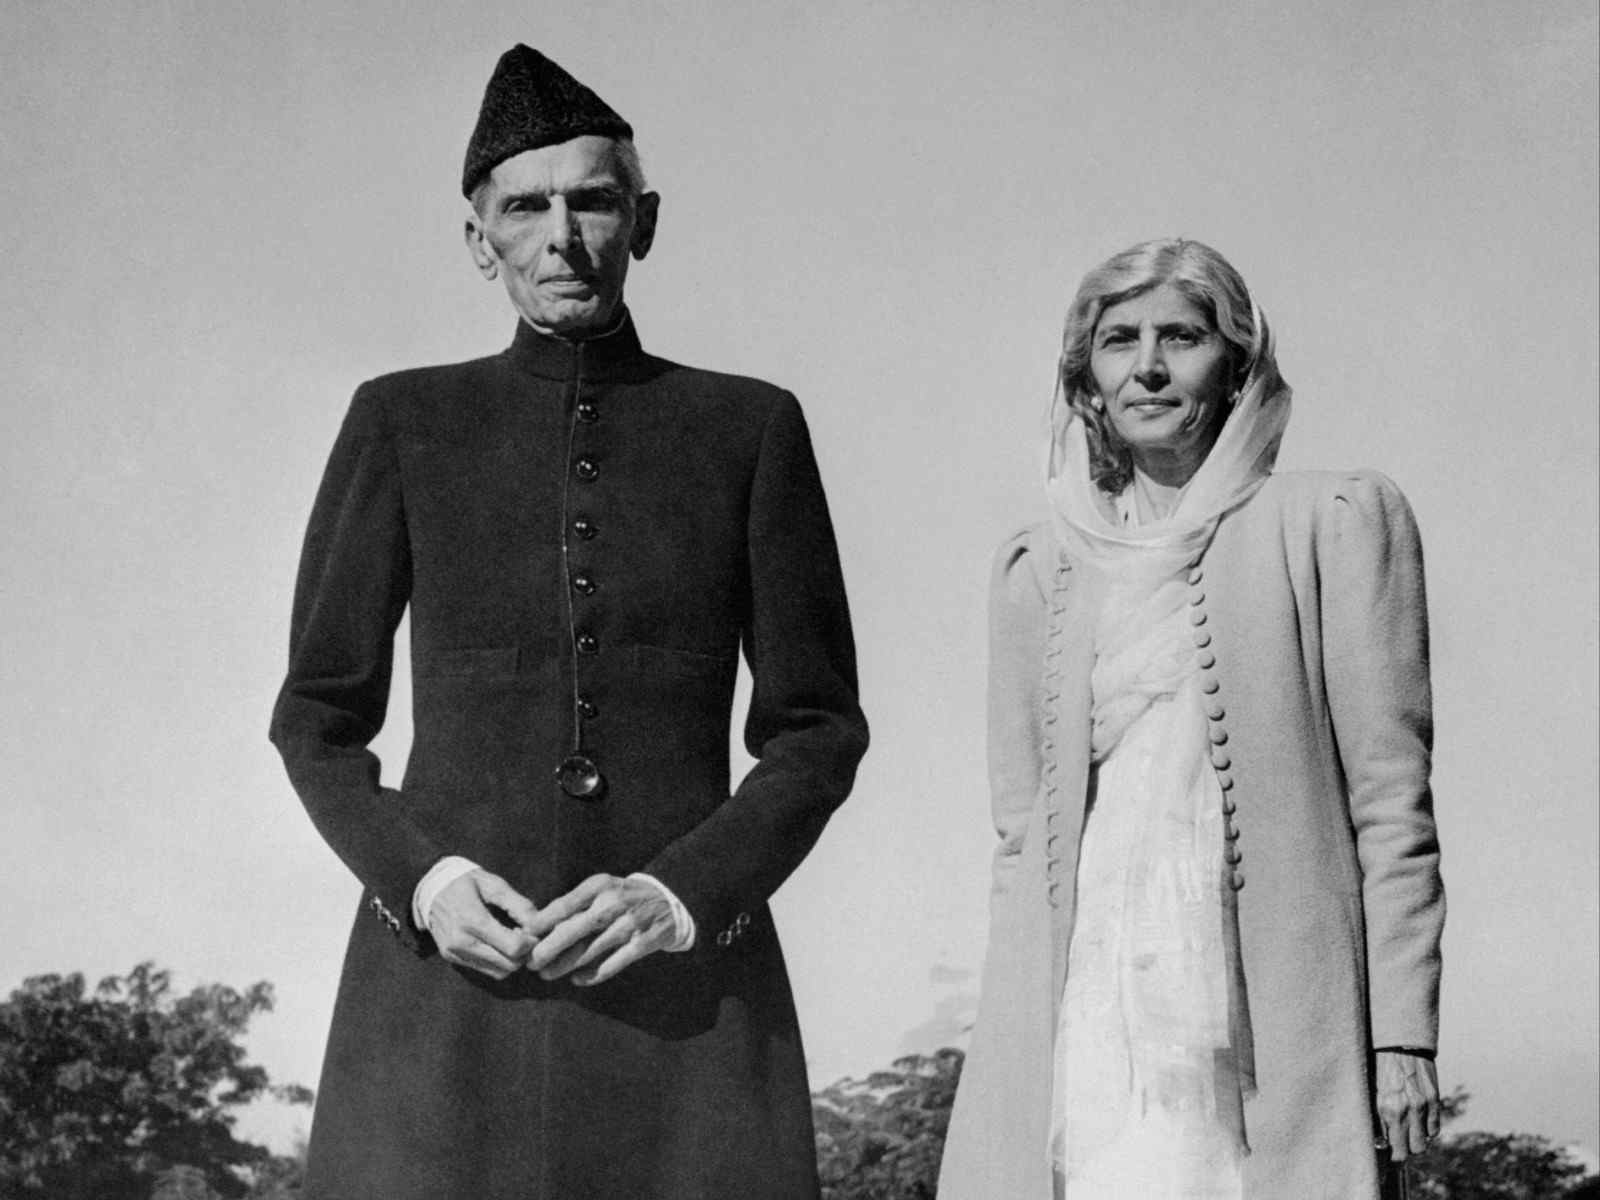 Celebrating his 72nd birthday, Mohammed Ali Jinnah, Governor-General of Pakistan, strolls on the lawn of the Government House at Karachi with his sister, Fatima (Getty Images)